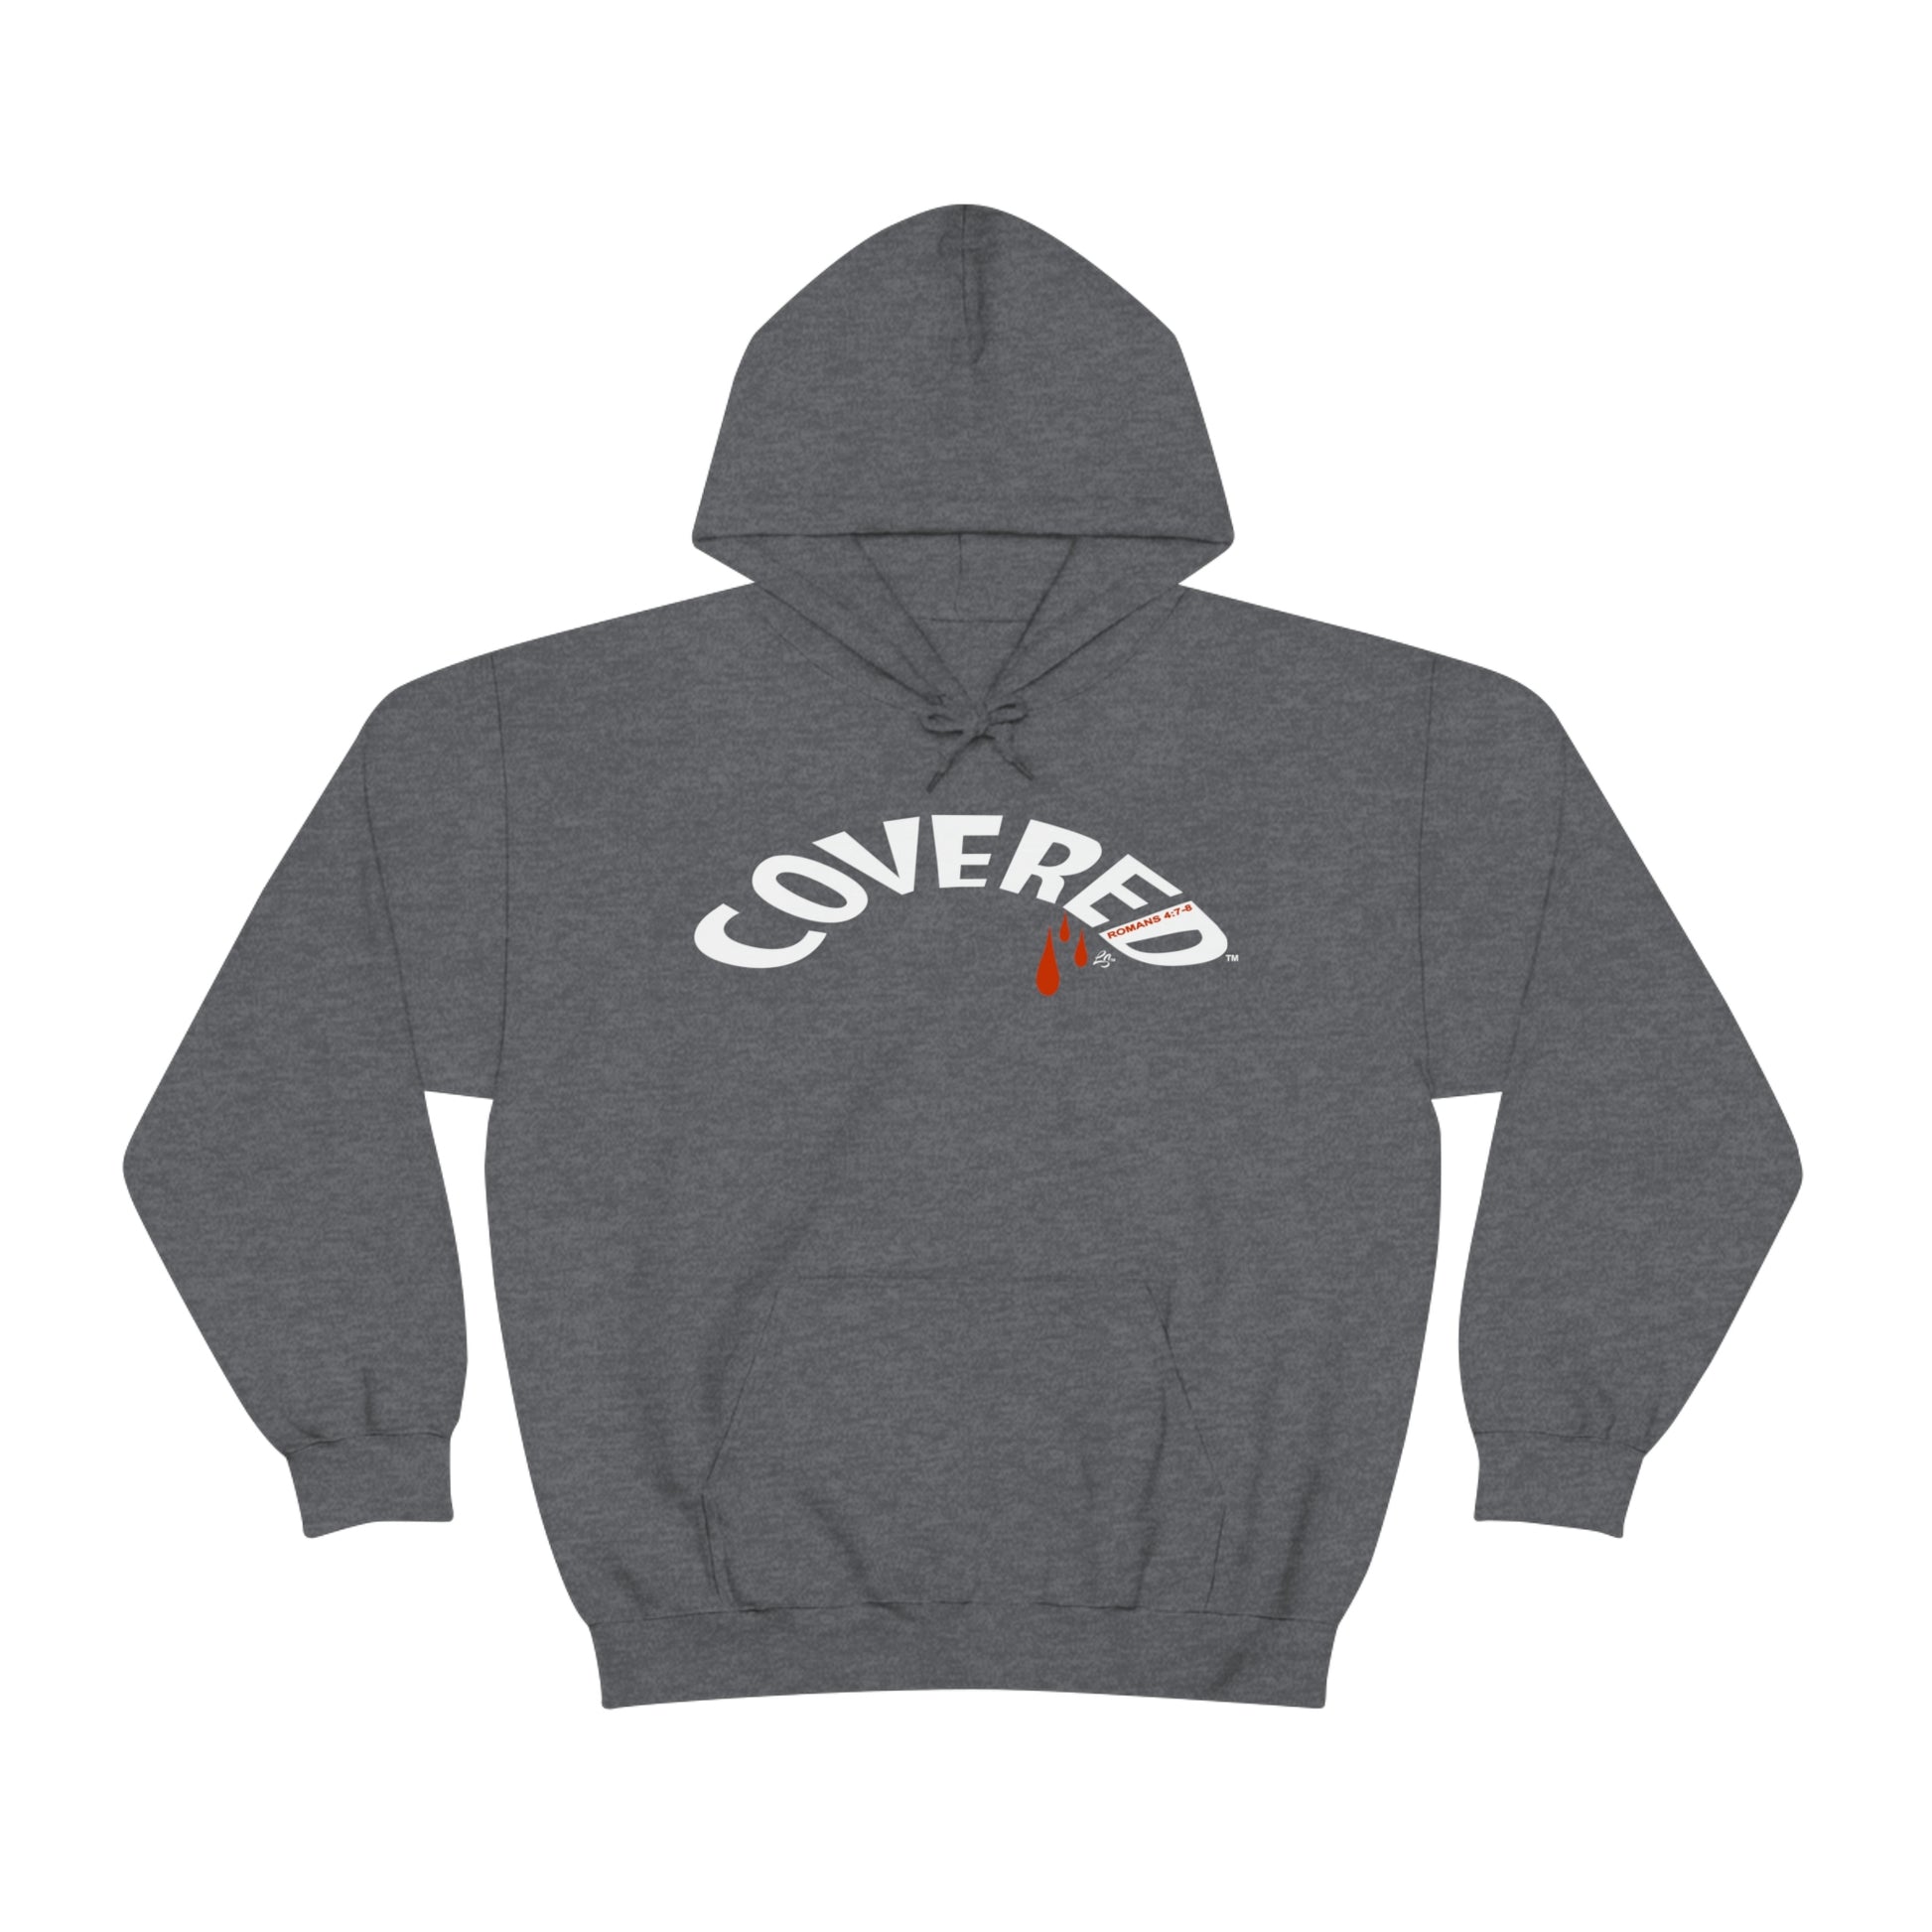 Covered hoodie gray